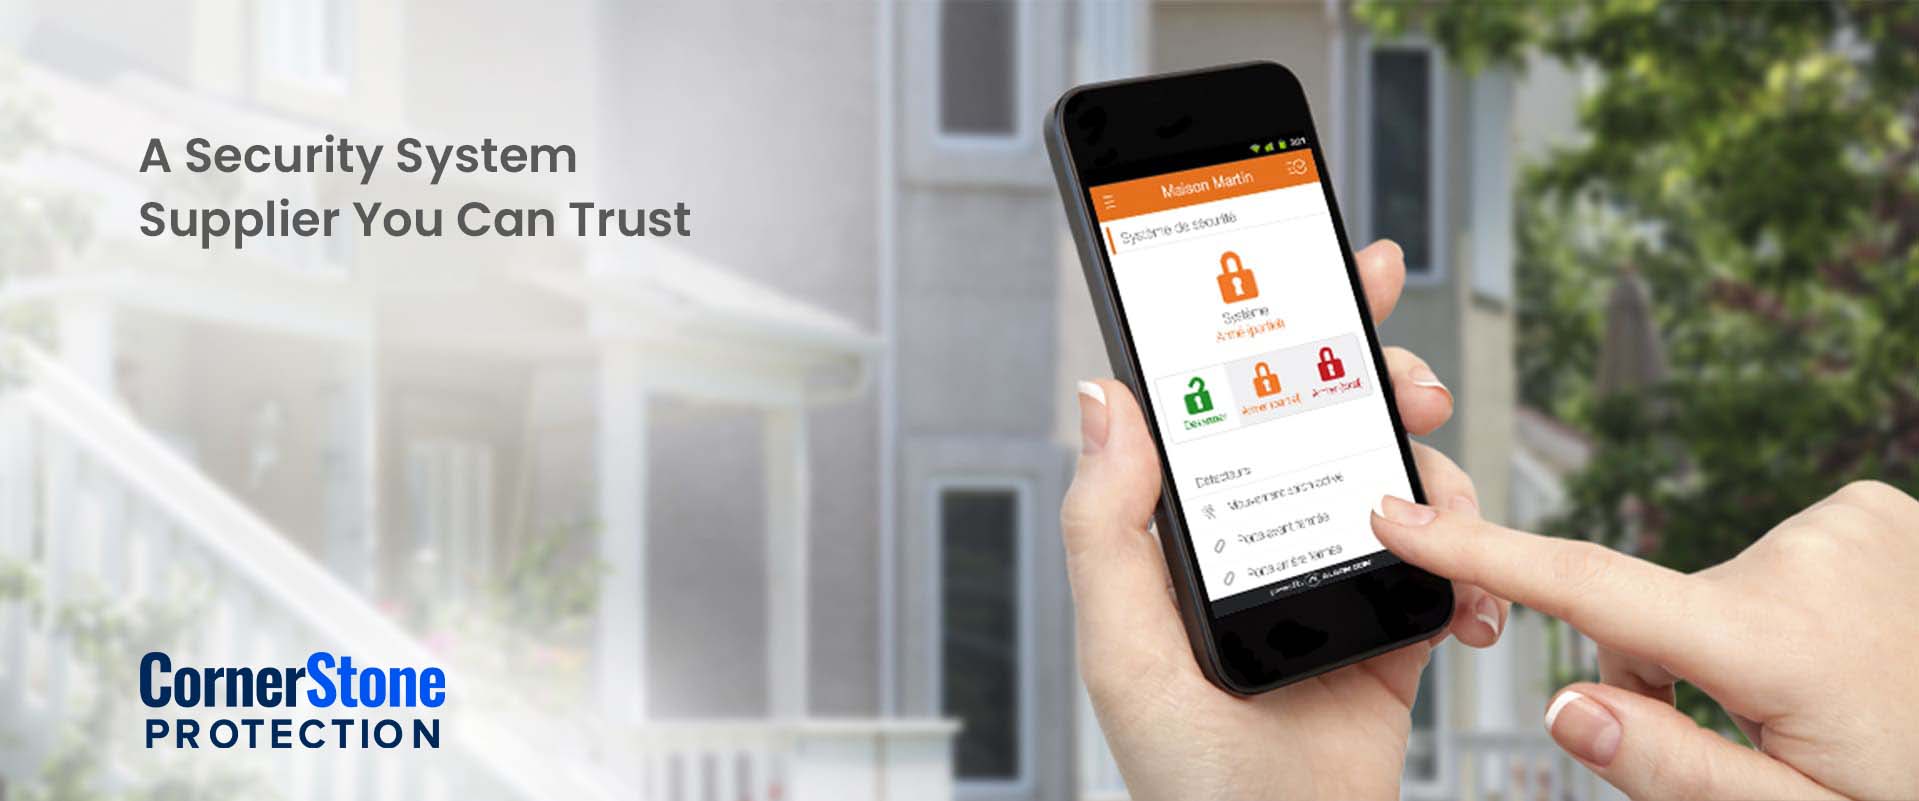 kentucky security systems supplier for business and home cornerstone protection